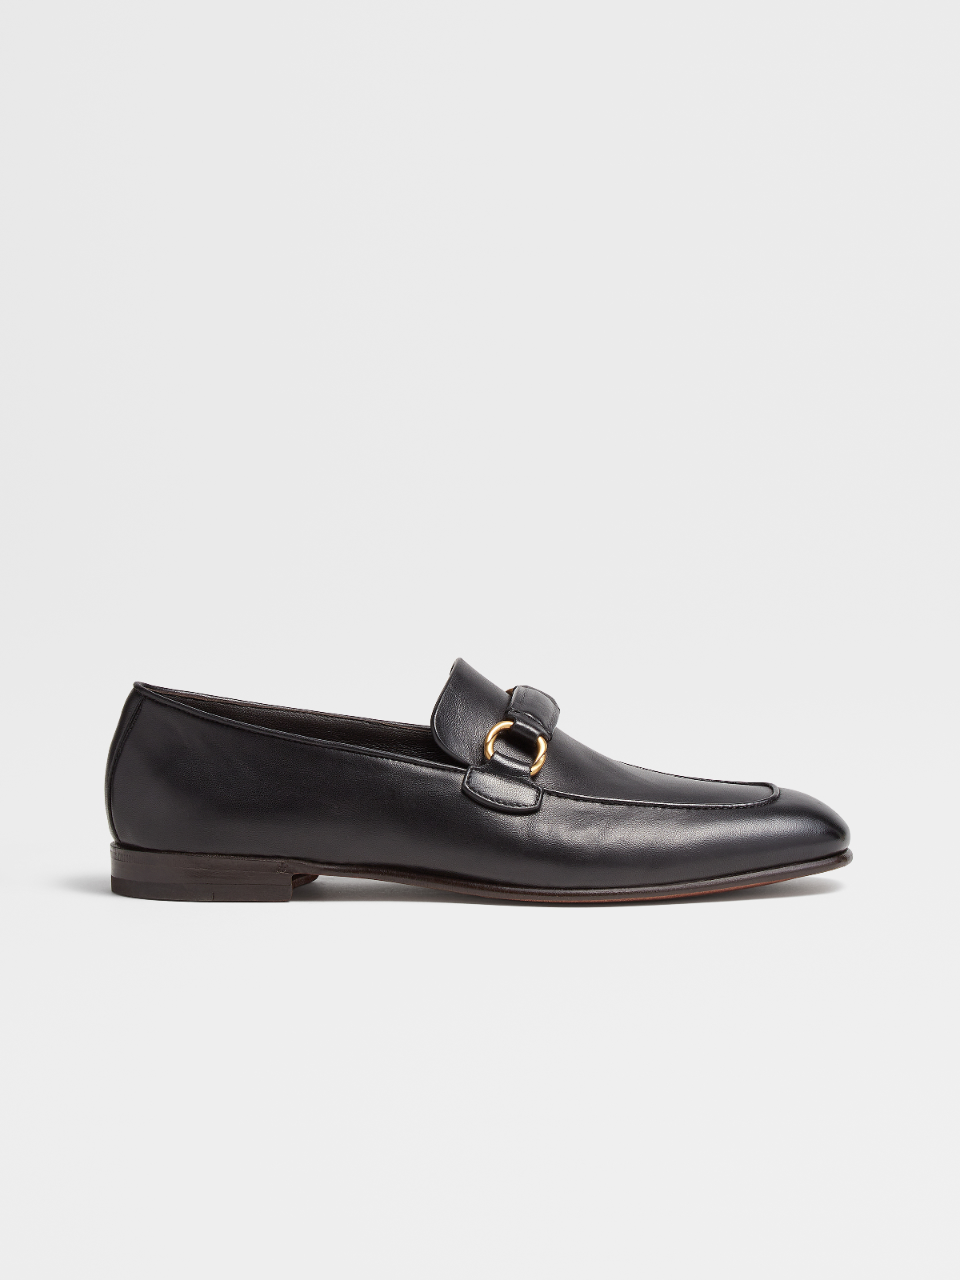 Black Hand-buffed Leather L'Asola Moccasin